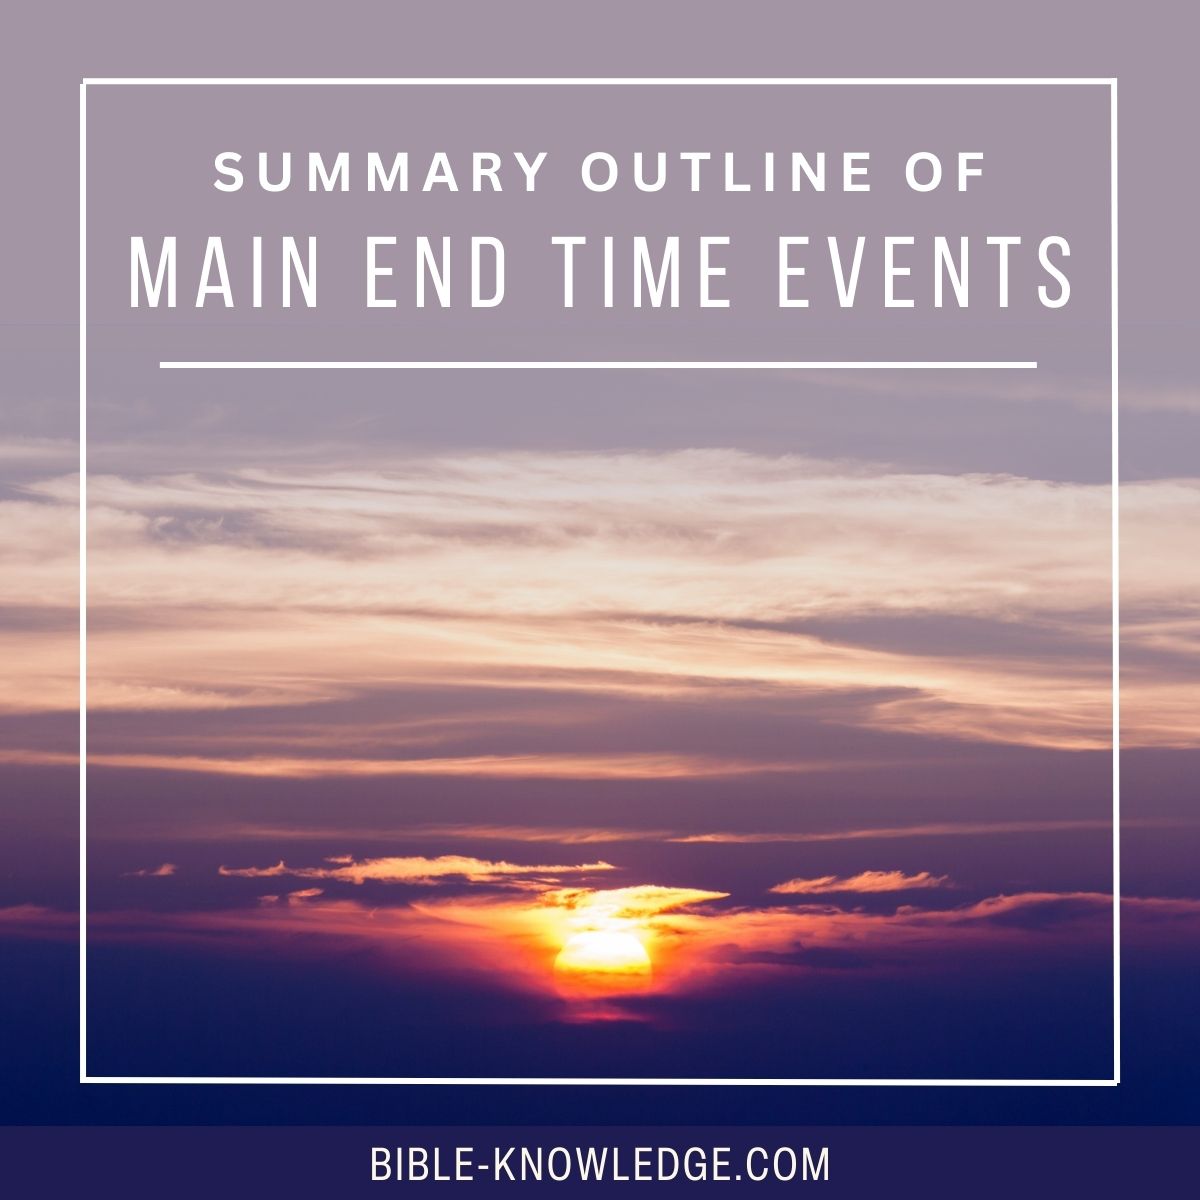 Summary Outline of Main End Time Events